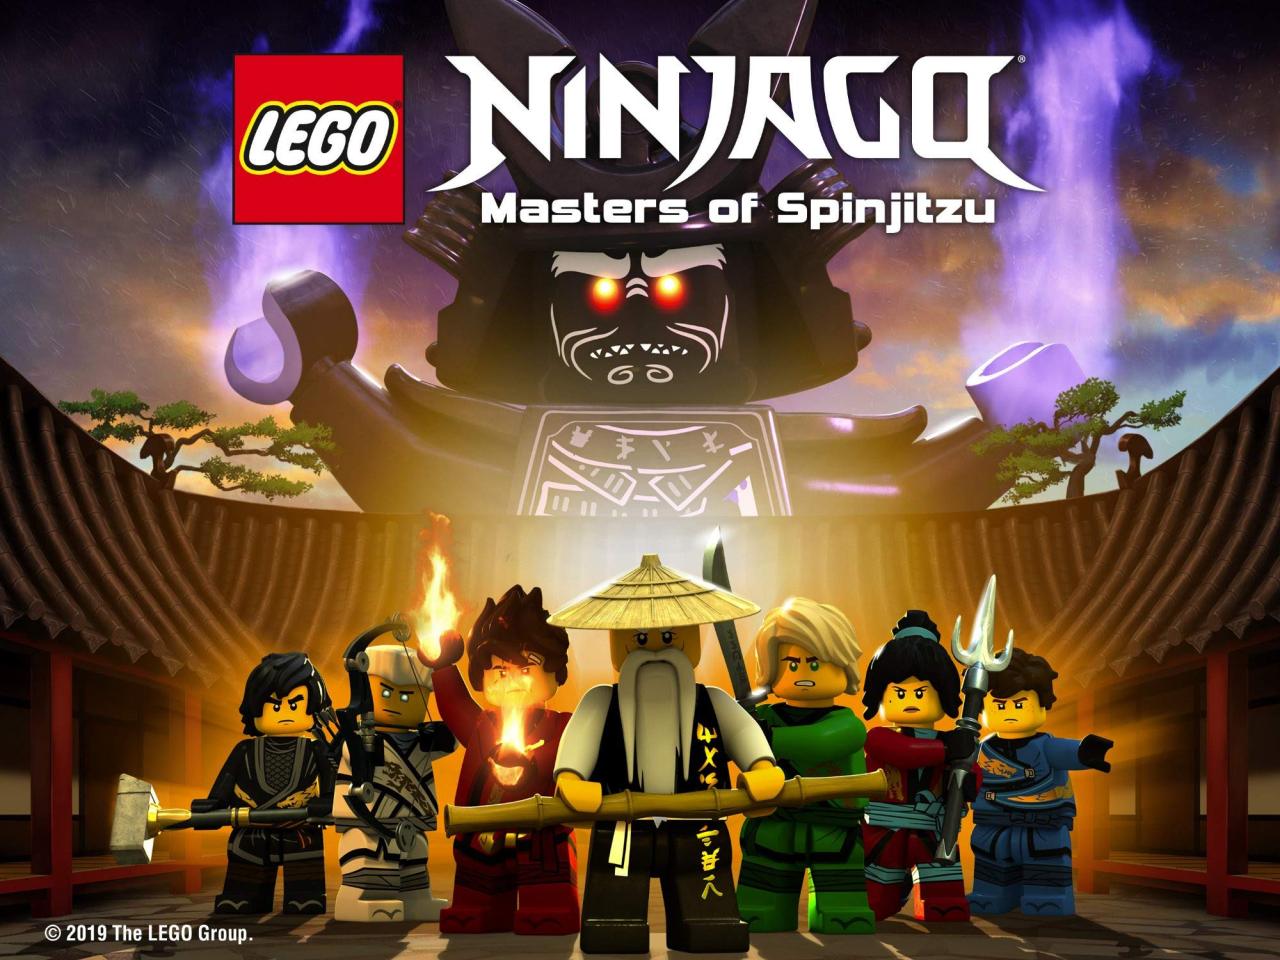 Ninjago has had some crazy twists and surprises, what do you think are the  top 5 best? : r/Ninjago